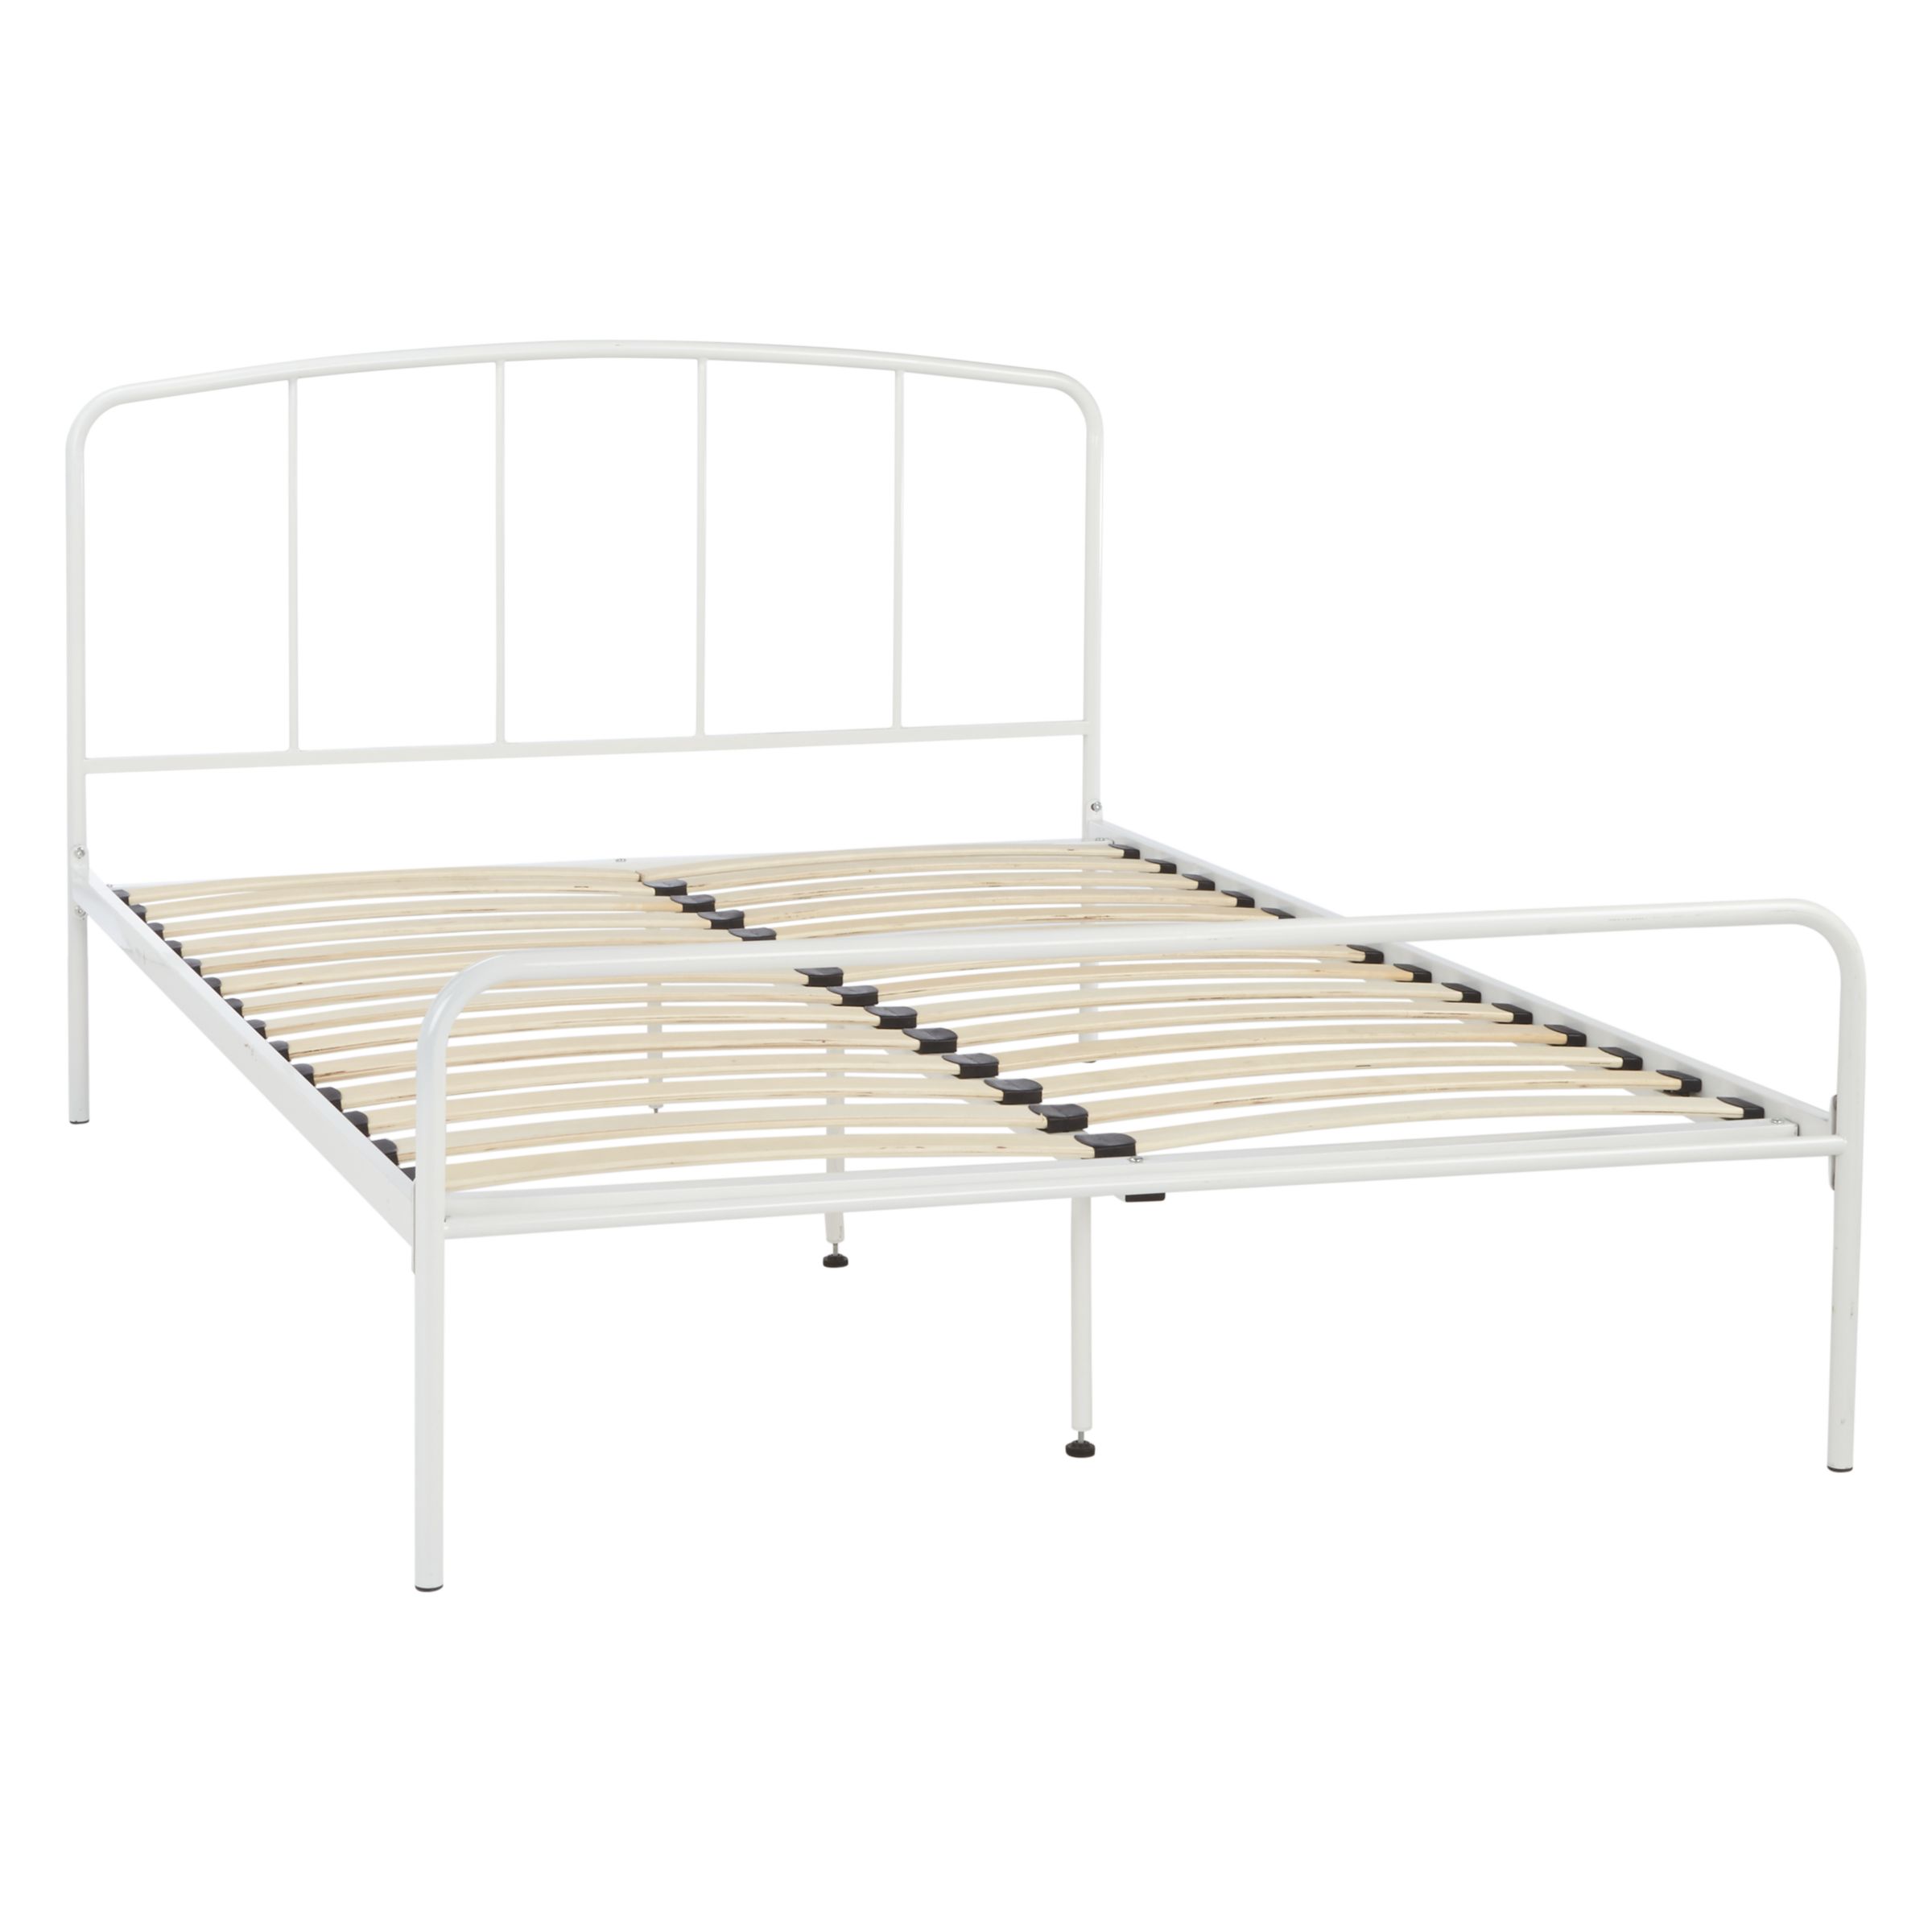 John Lewis & Partners Alpha Bed Frame, Small Double